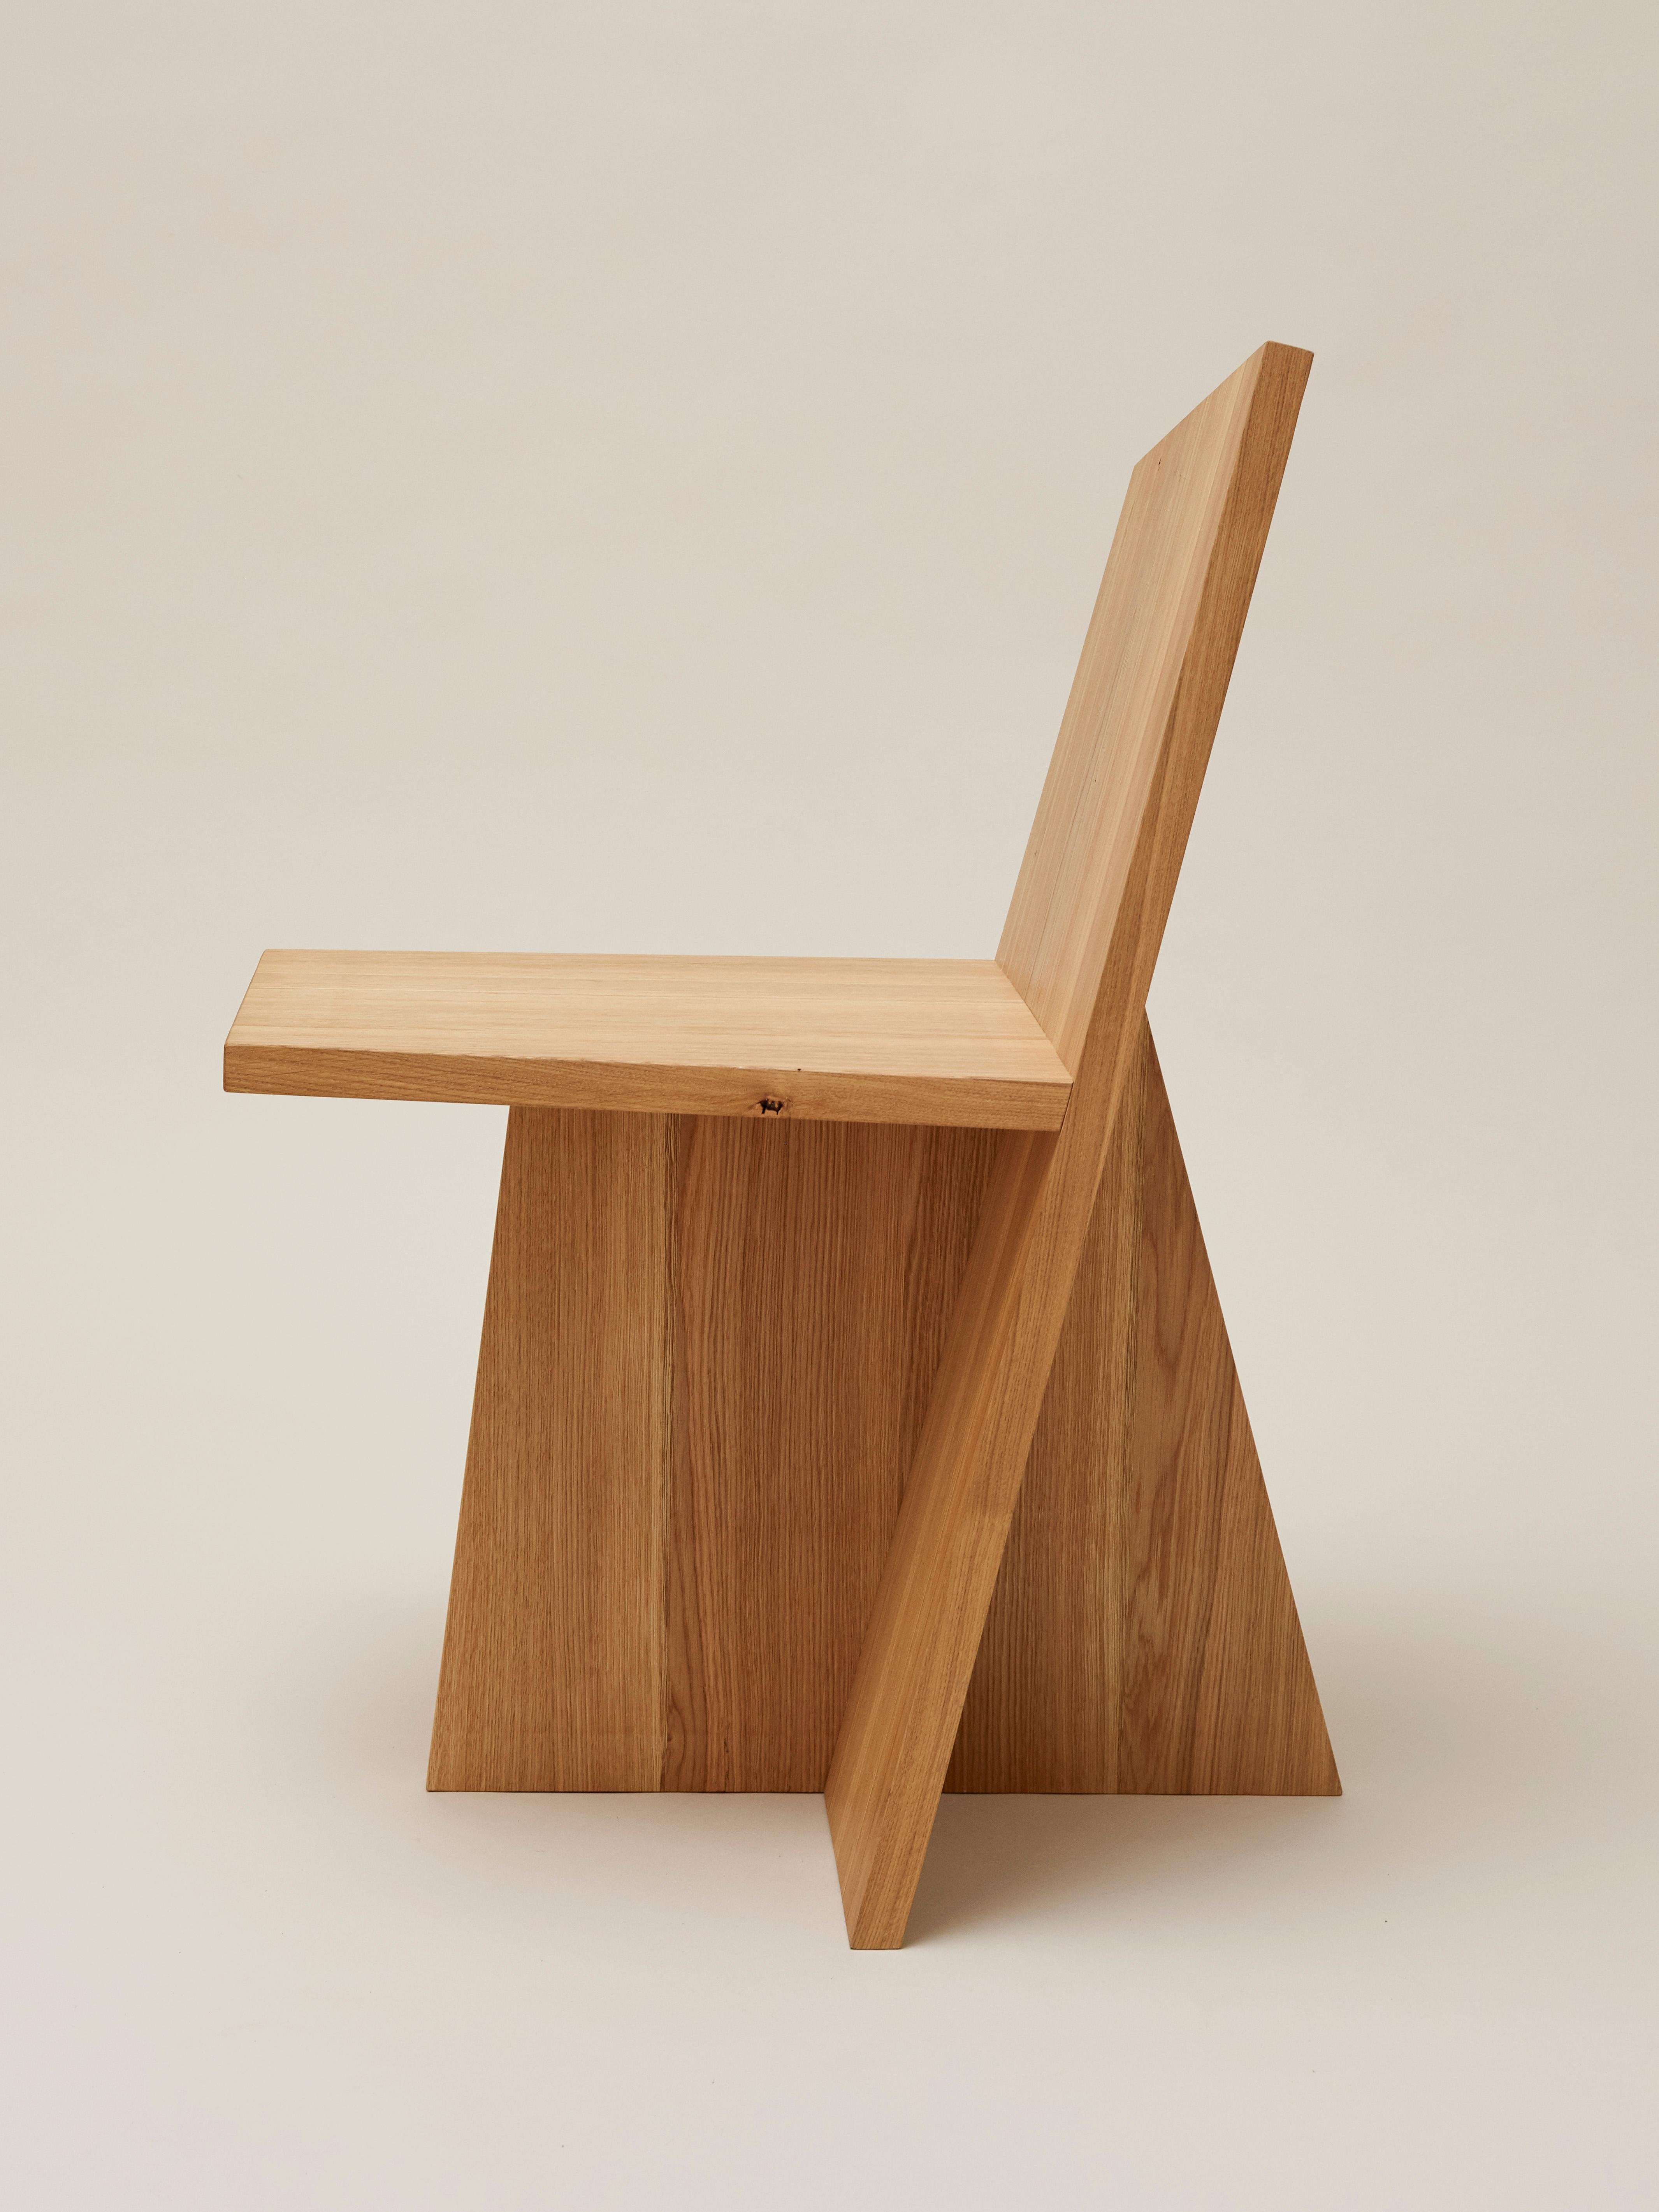 Crooked dining chair by Nazara Lazaro
Dimensions: H 86 cm x W 53 cm x D 58 cm
Materials: Massive oak with oil wax surface

Also available in natural massive oak, walnut, and white lacquered wood.

The Crooked Collection is an ongoing series of